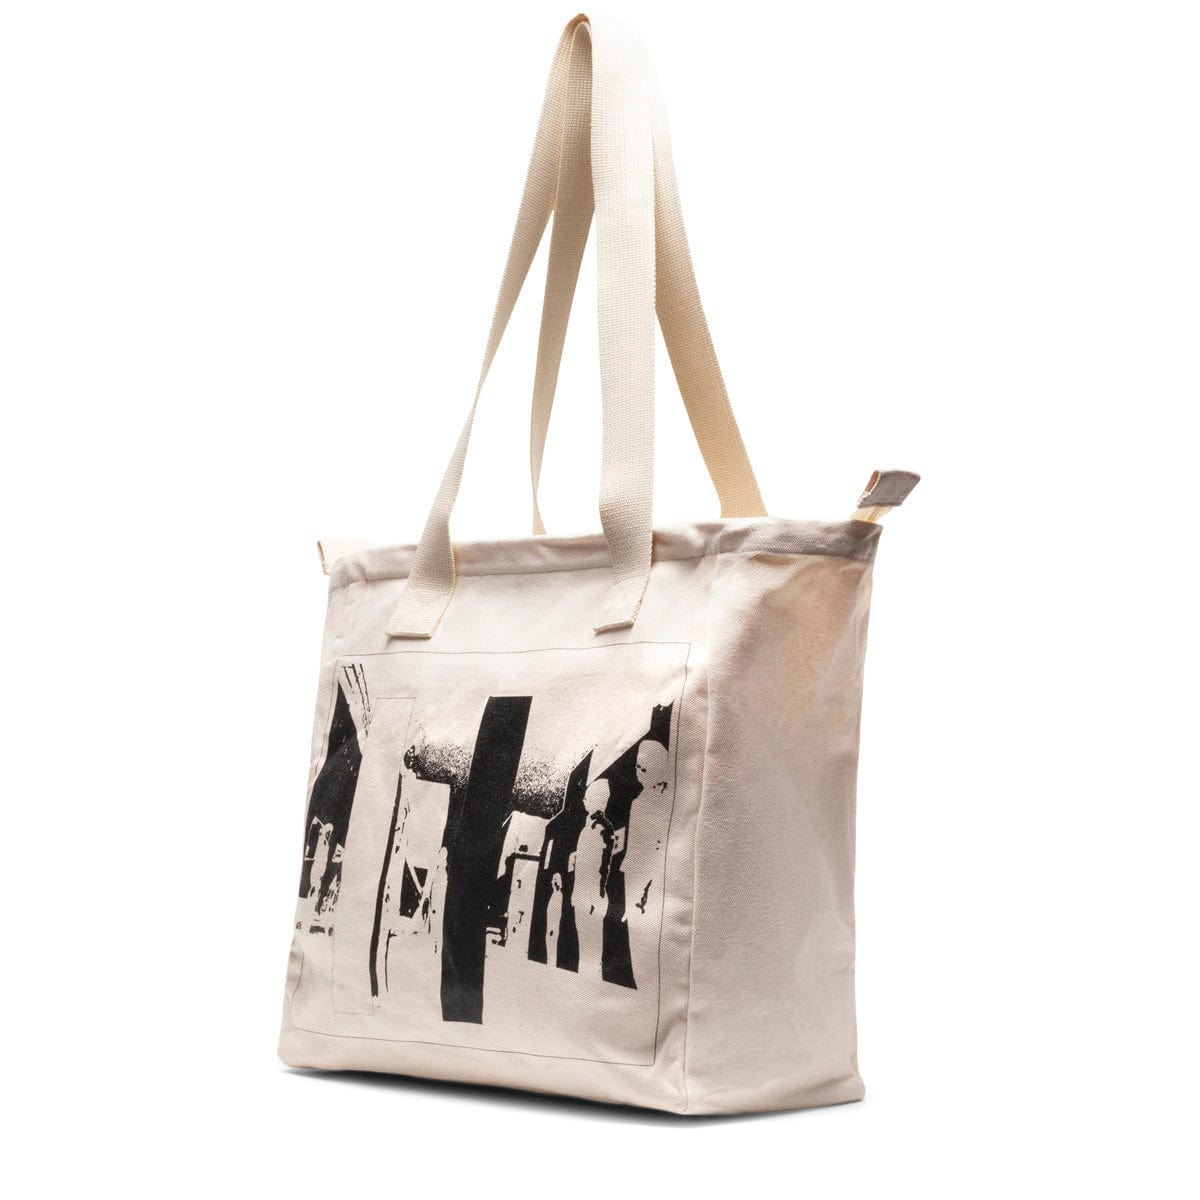 Cav Empt Bags WHITE / O/S BEHIND THE PILLER TOTE